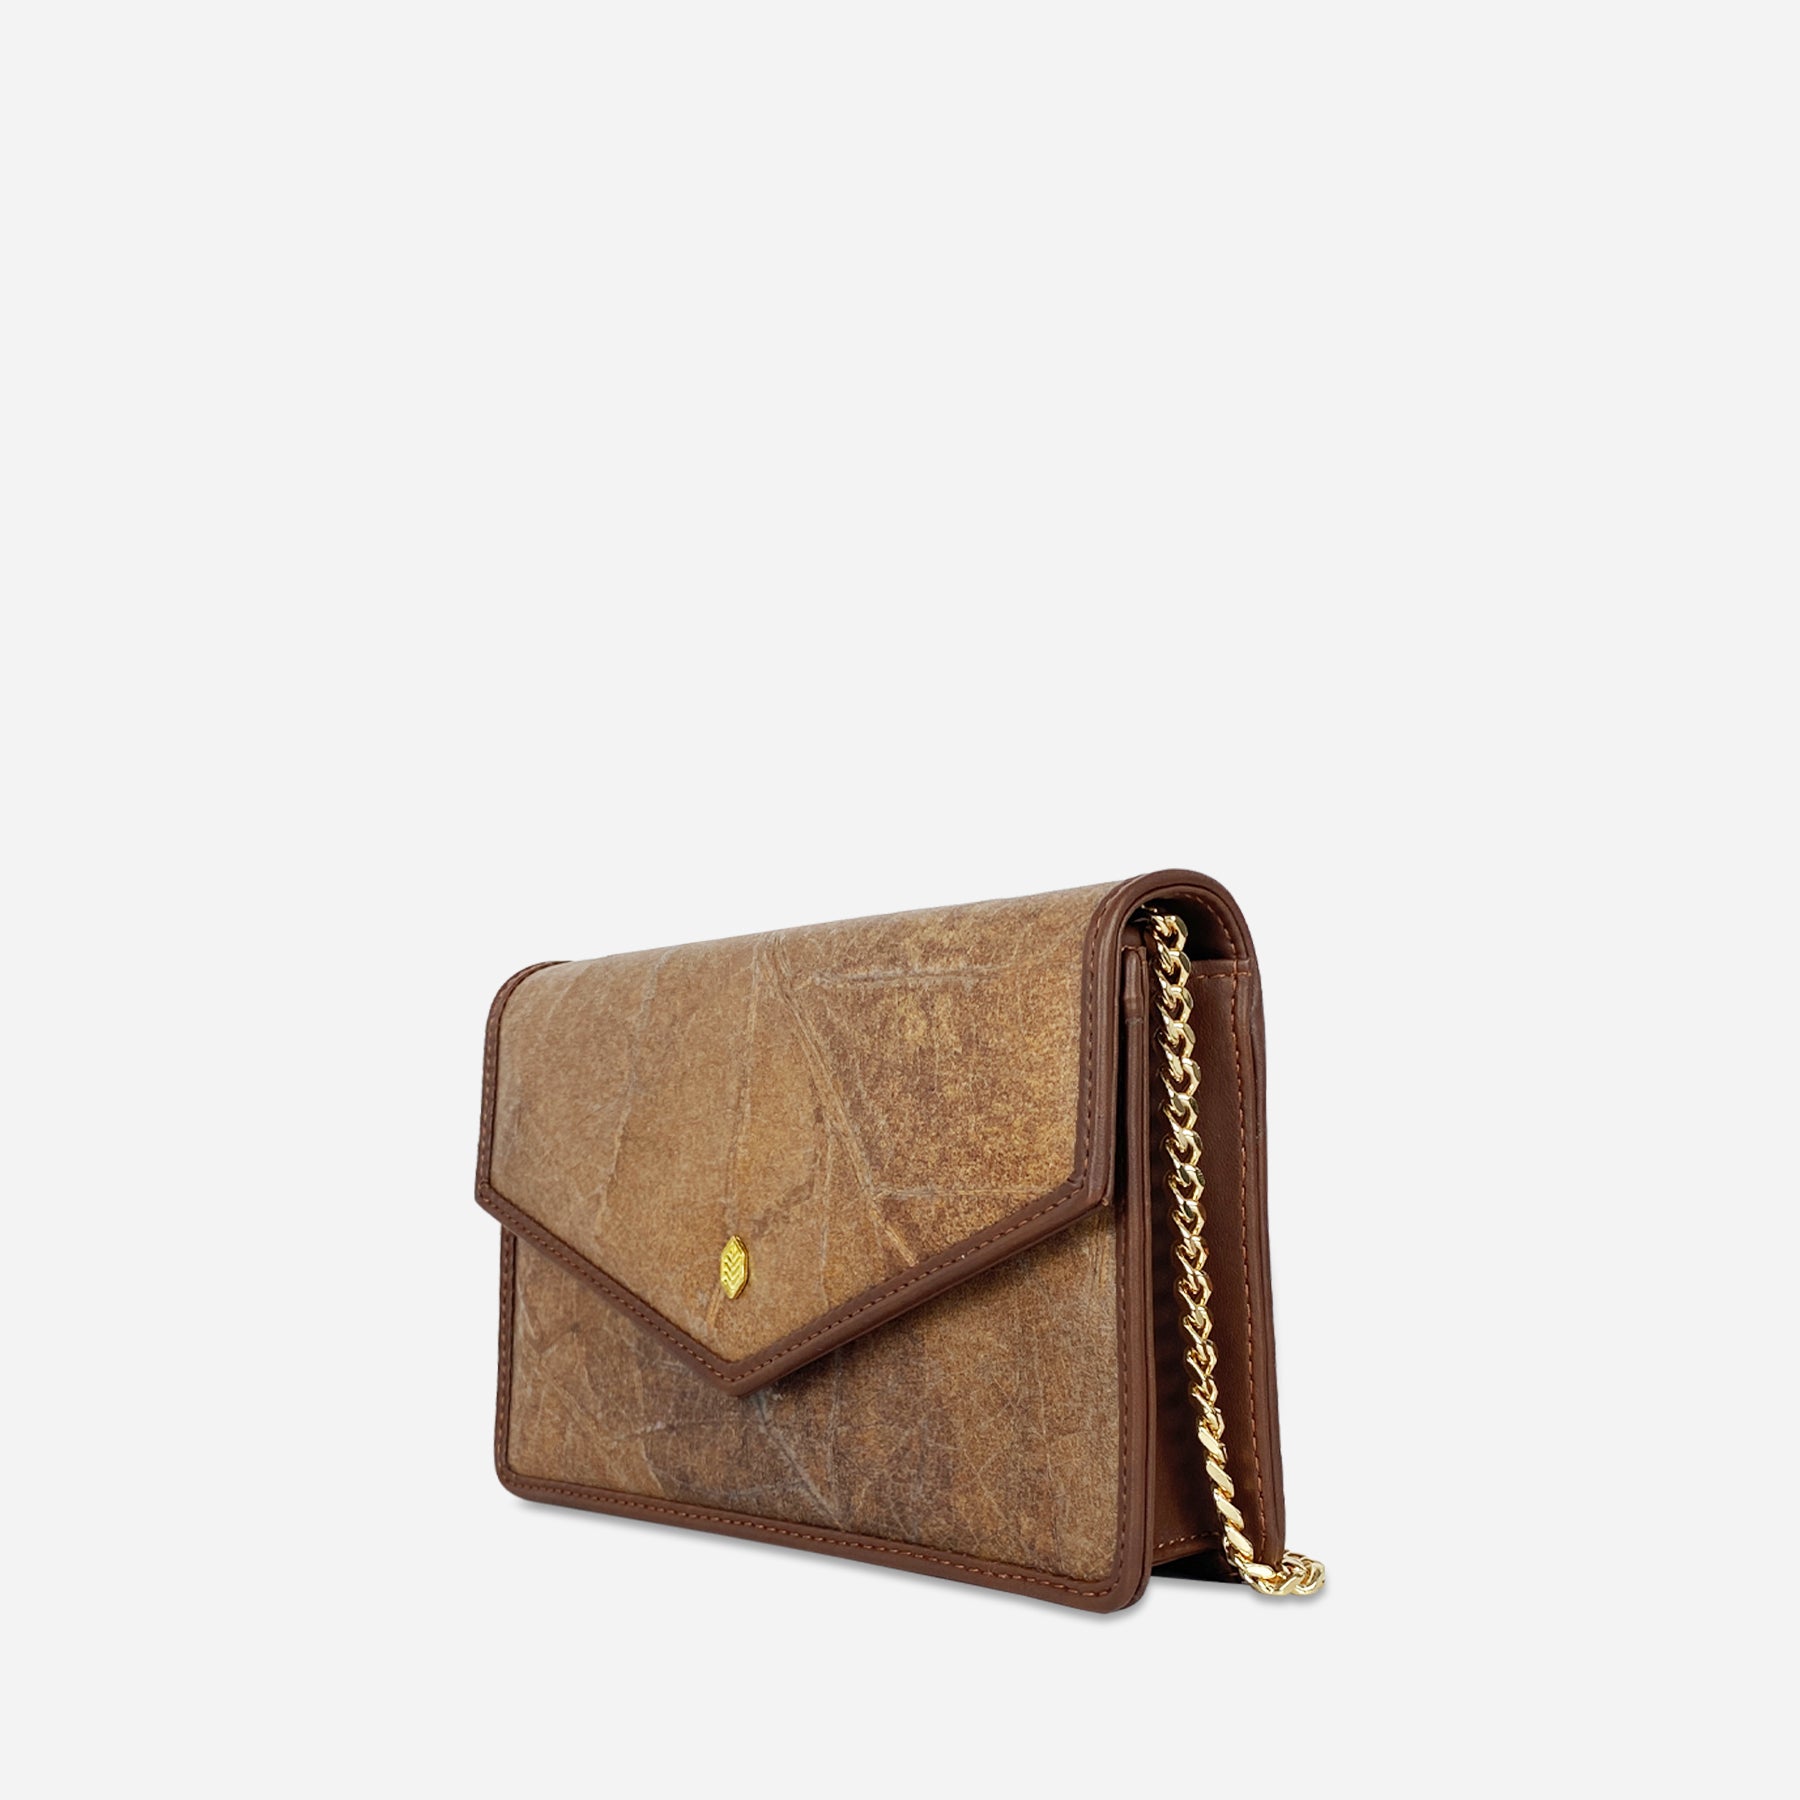 Vegan Leather Pouch Bag